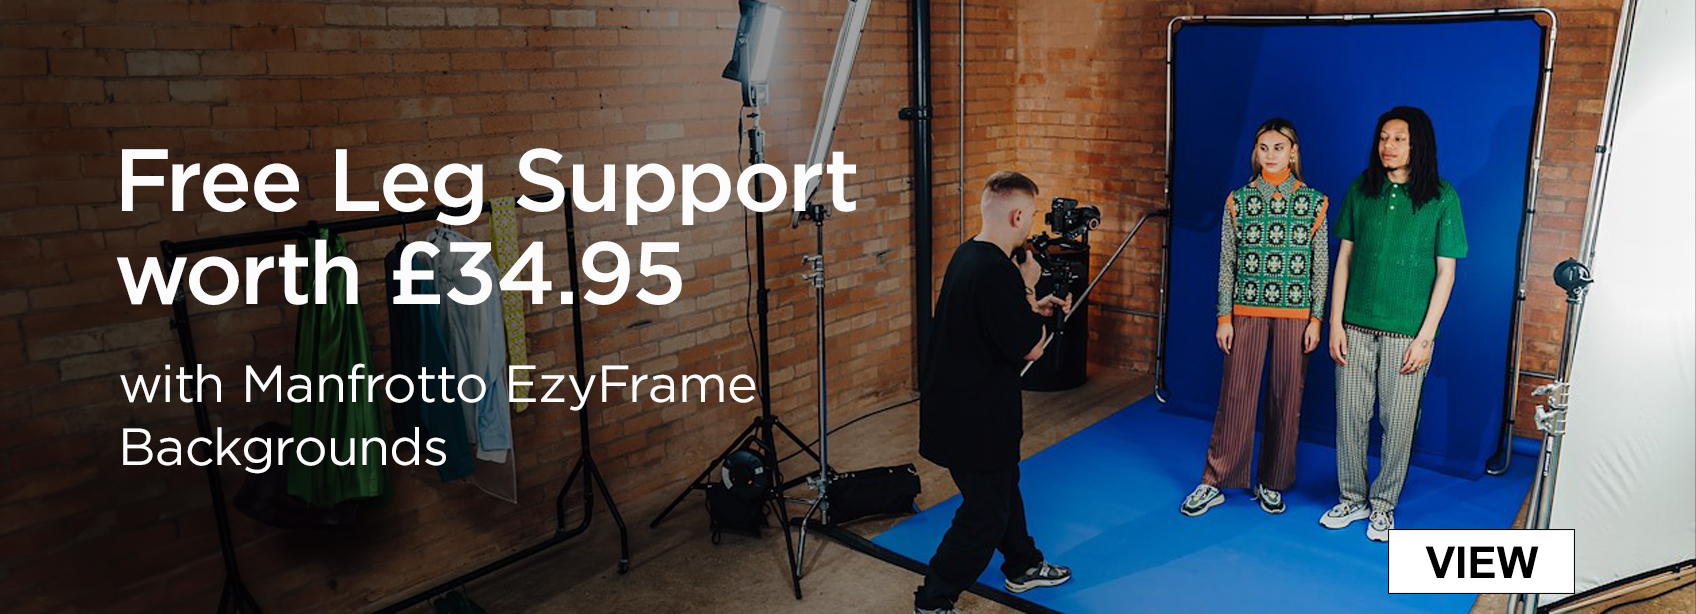 Manfrotto EzyFrame Backgrounds | Free Leg Support